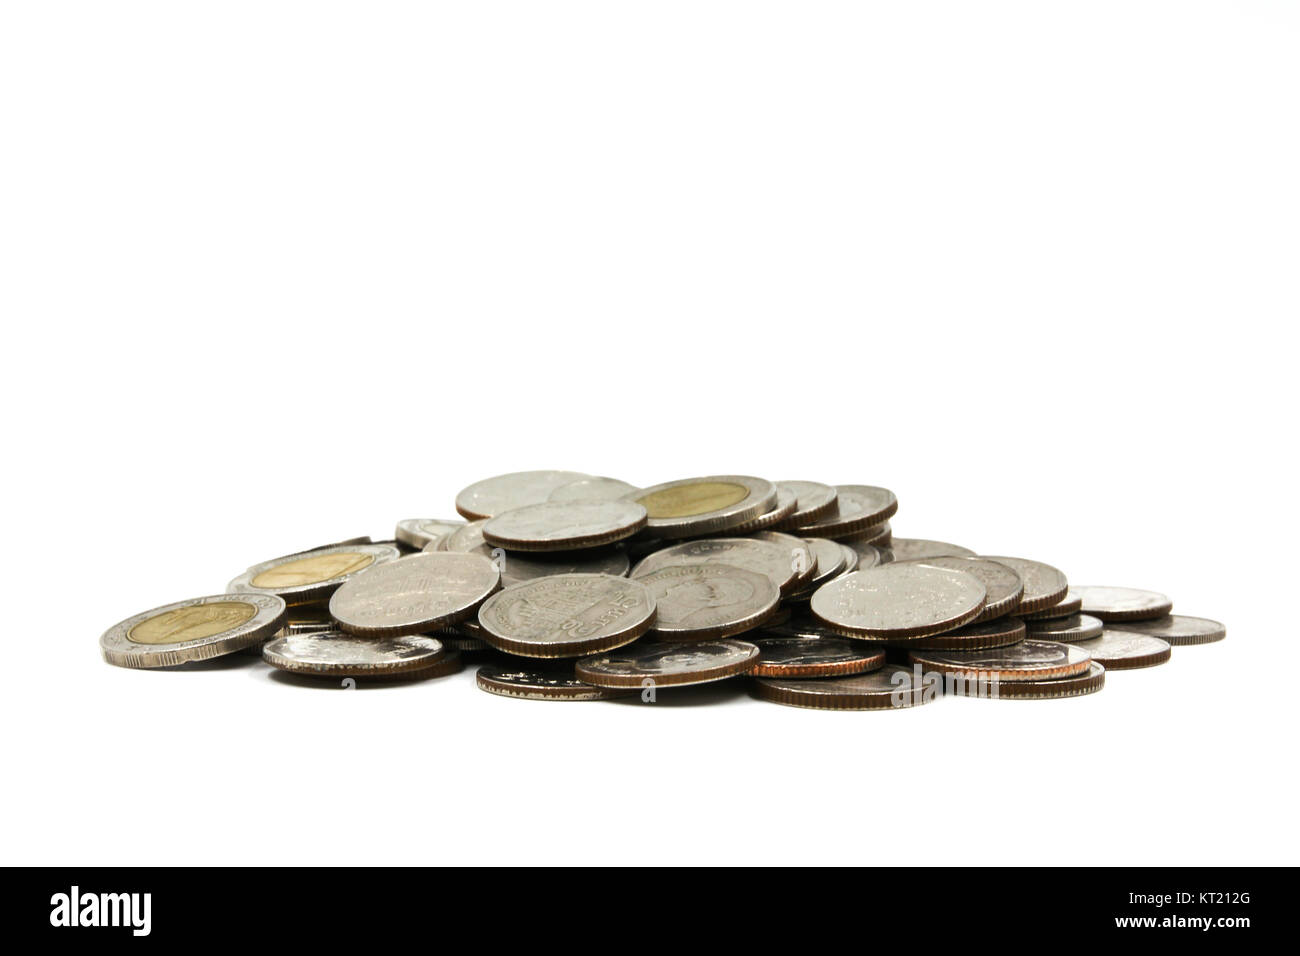 A pile of coins on white background Stock Photo